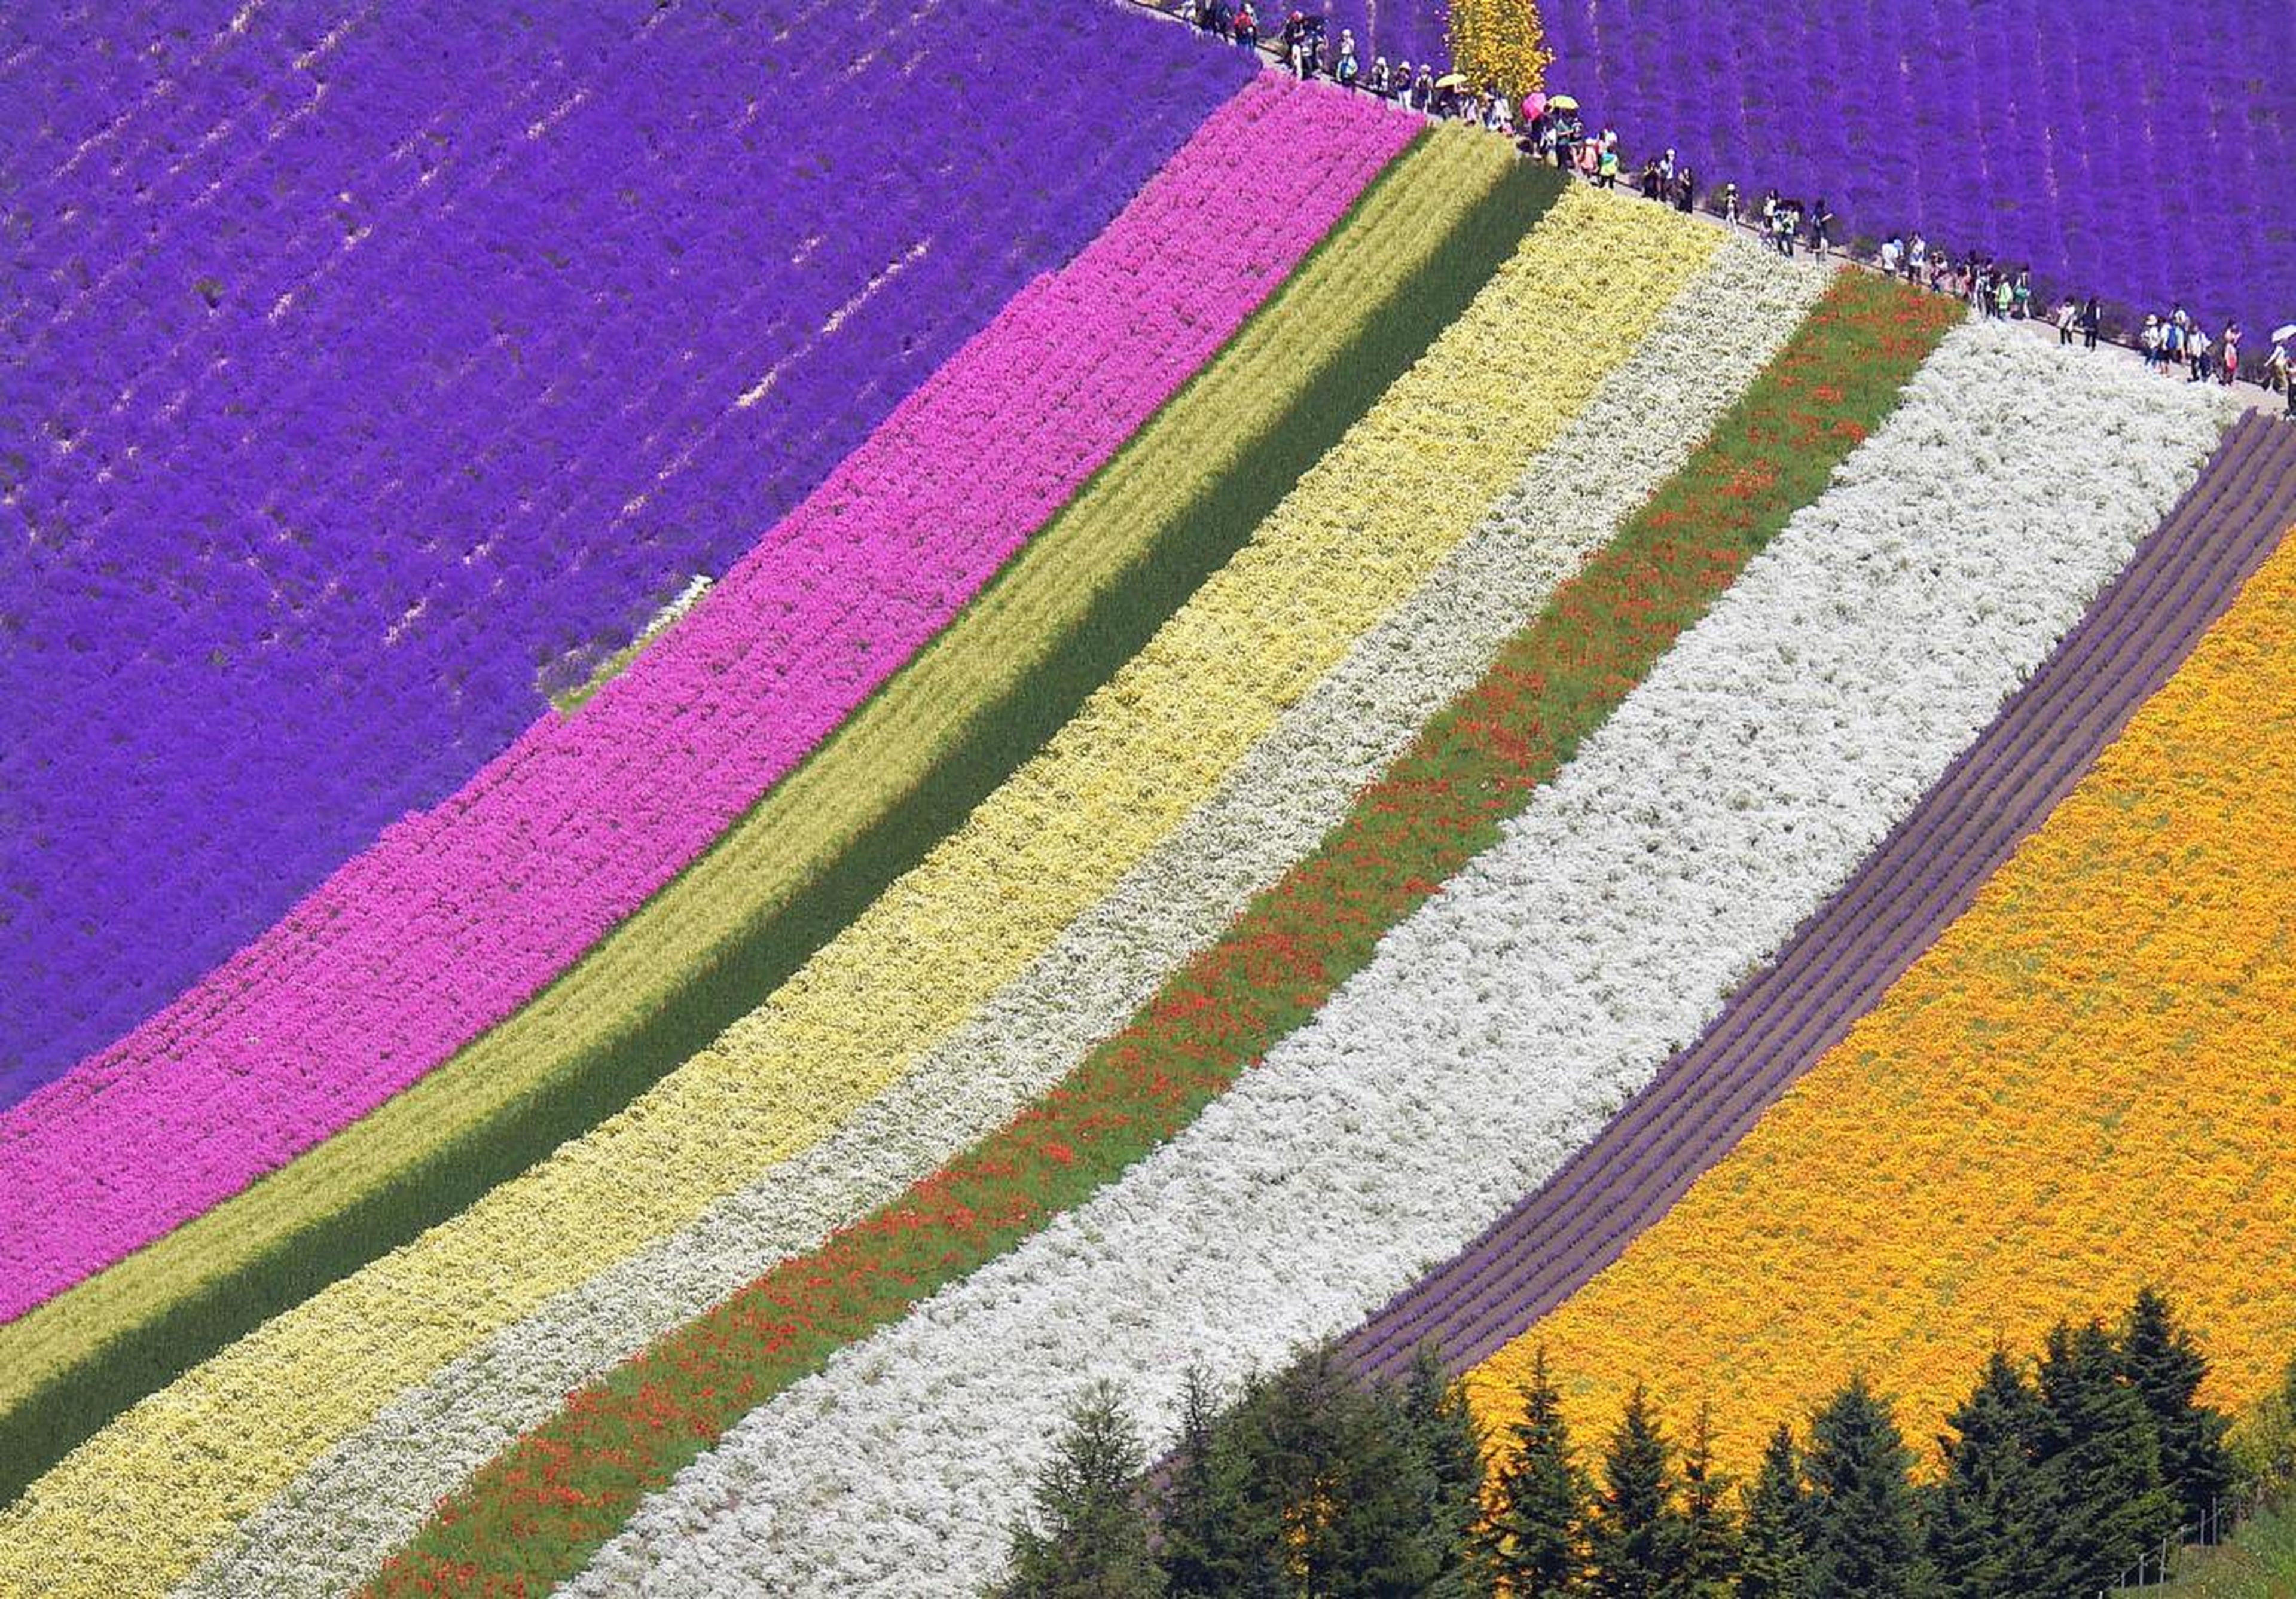 And Farm Tomita is home to 13 different flower gardens.